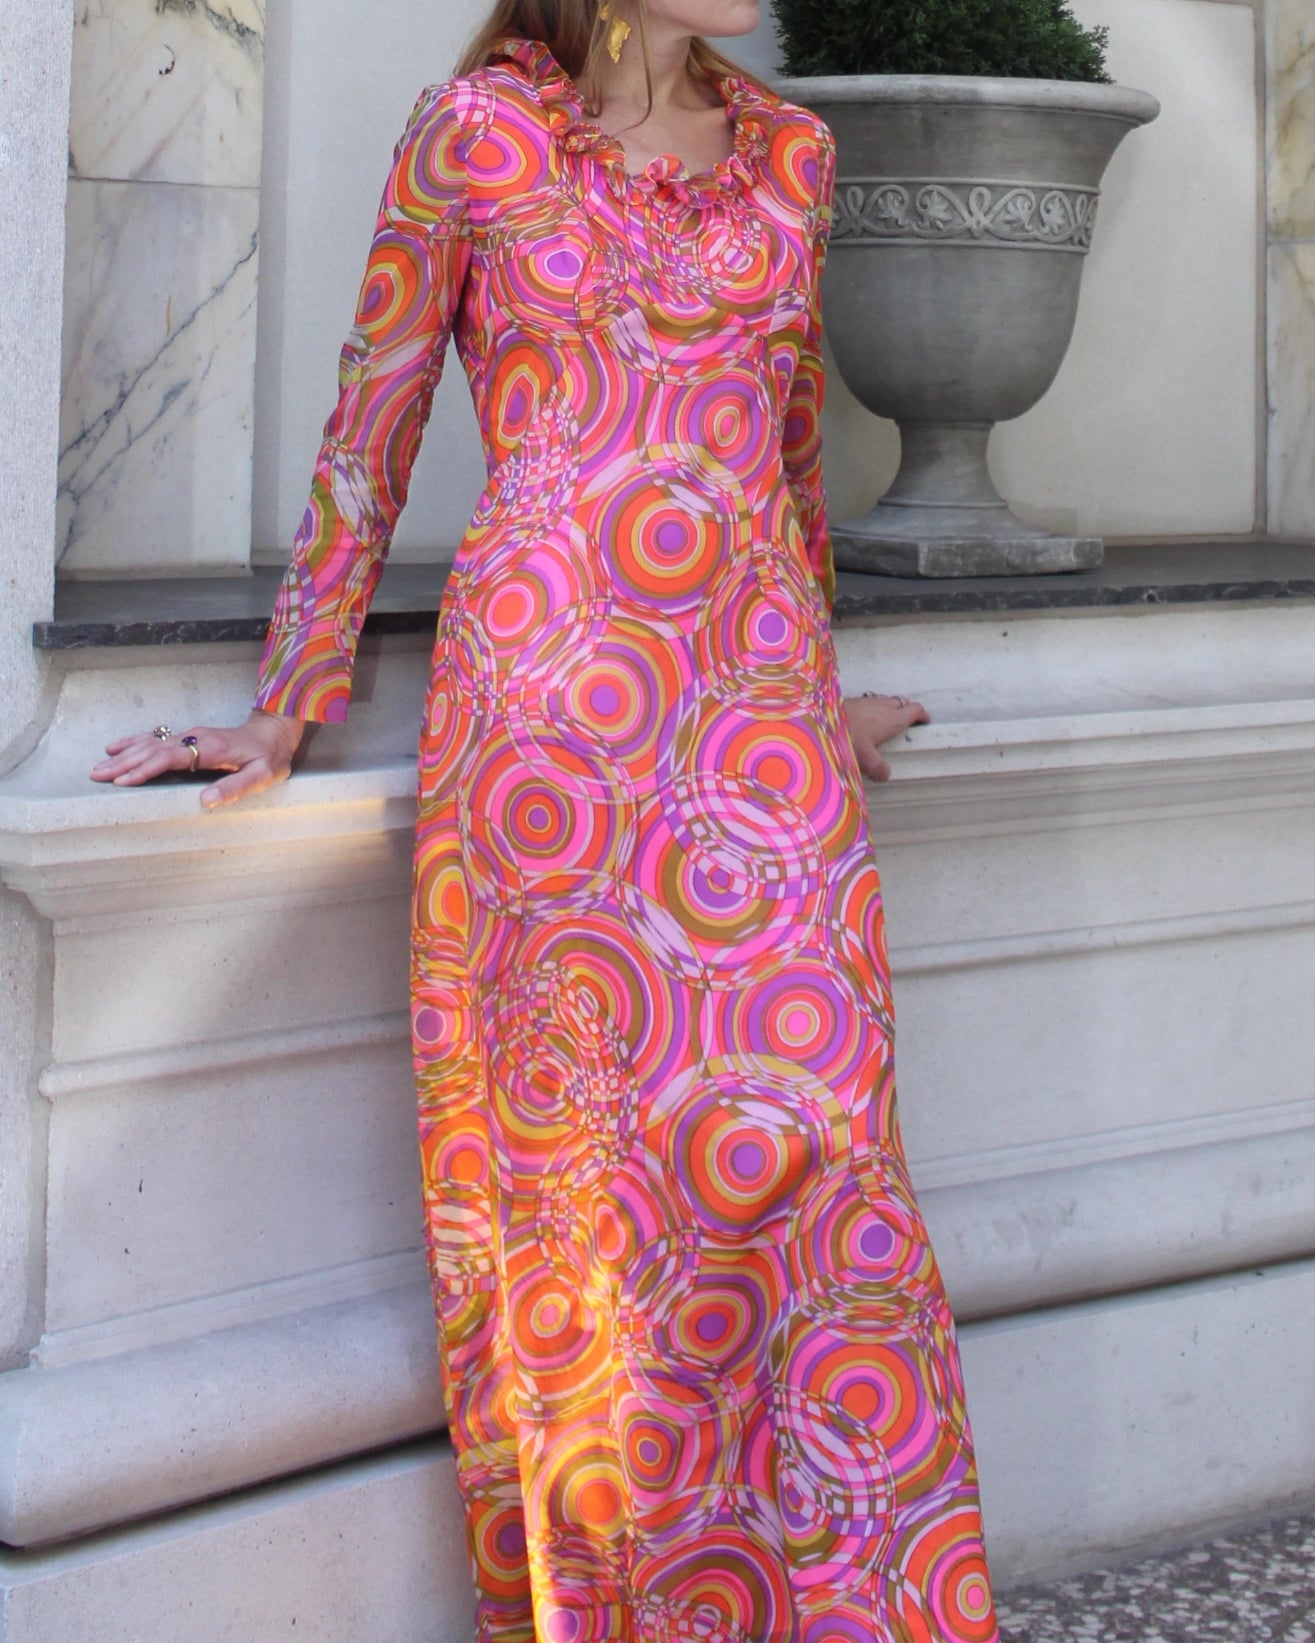 VINTAGE 1960s PSYCHEDELIC MAXIDRESS